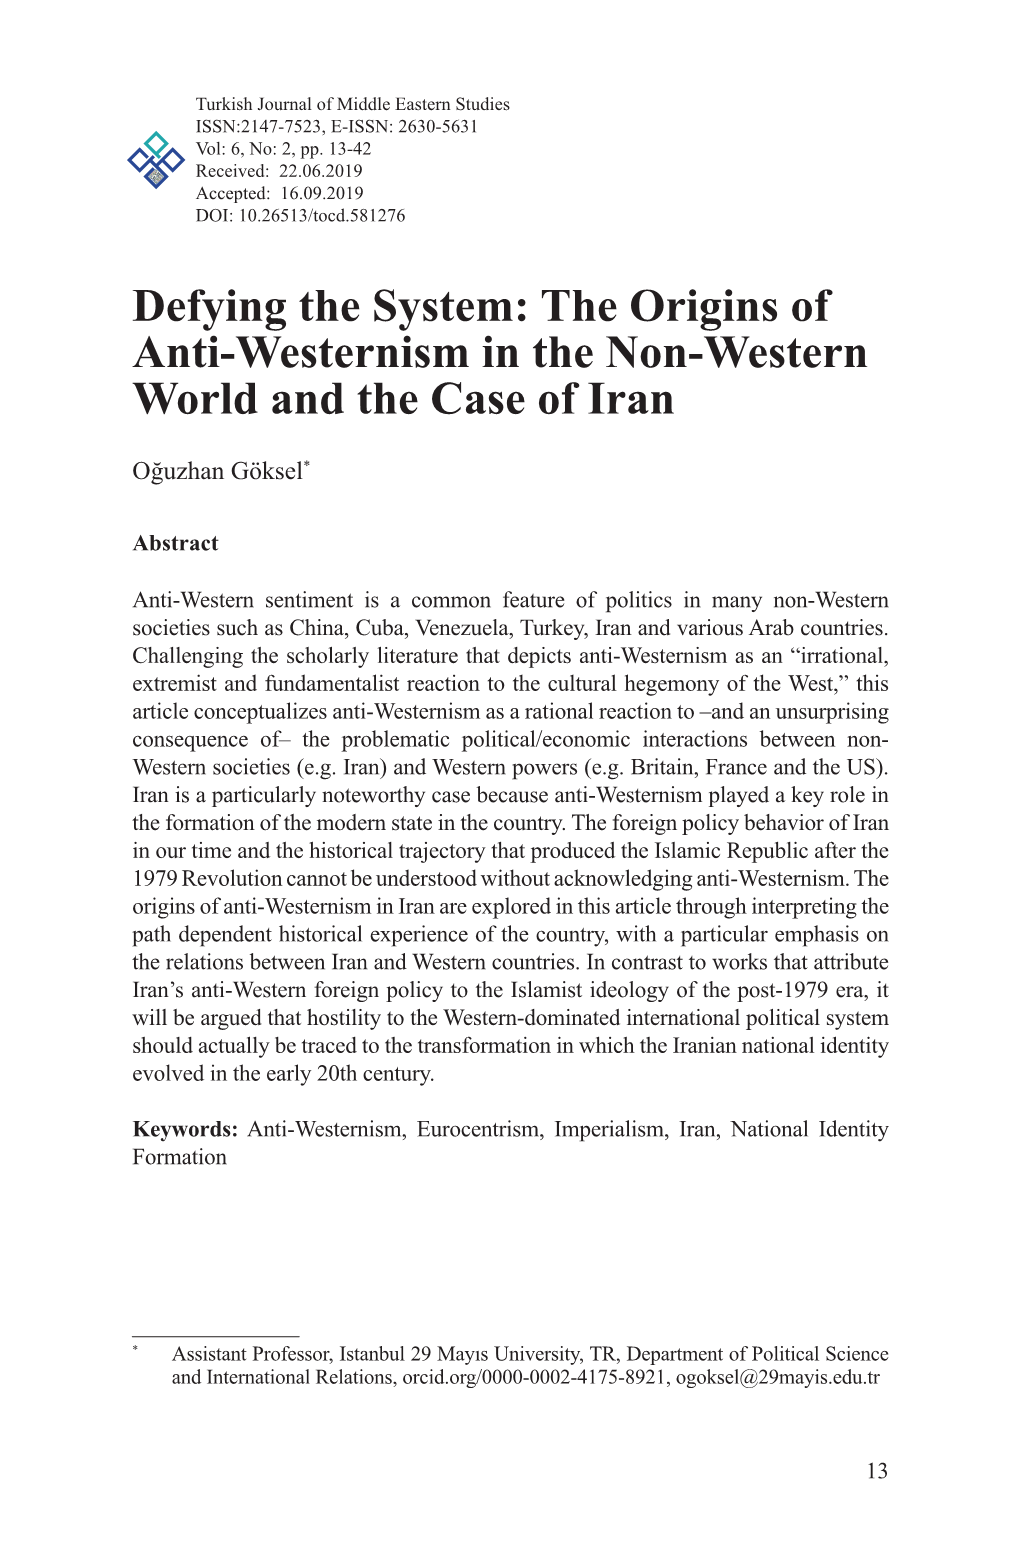 Defying the System: the Origins of Anti-Westernism in the Non-Western World and the Case of Iran